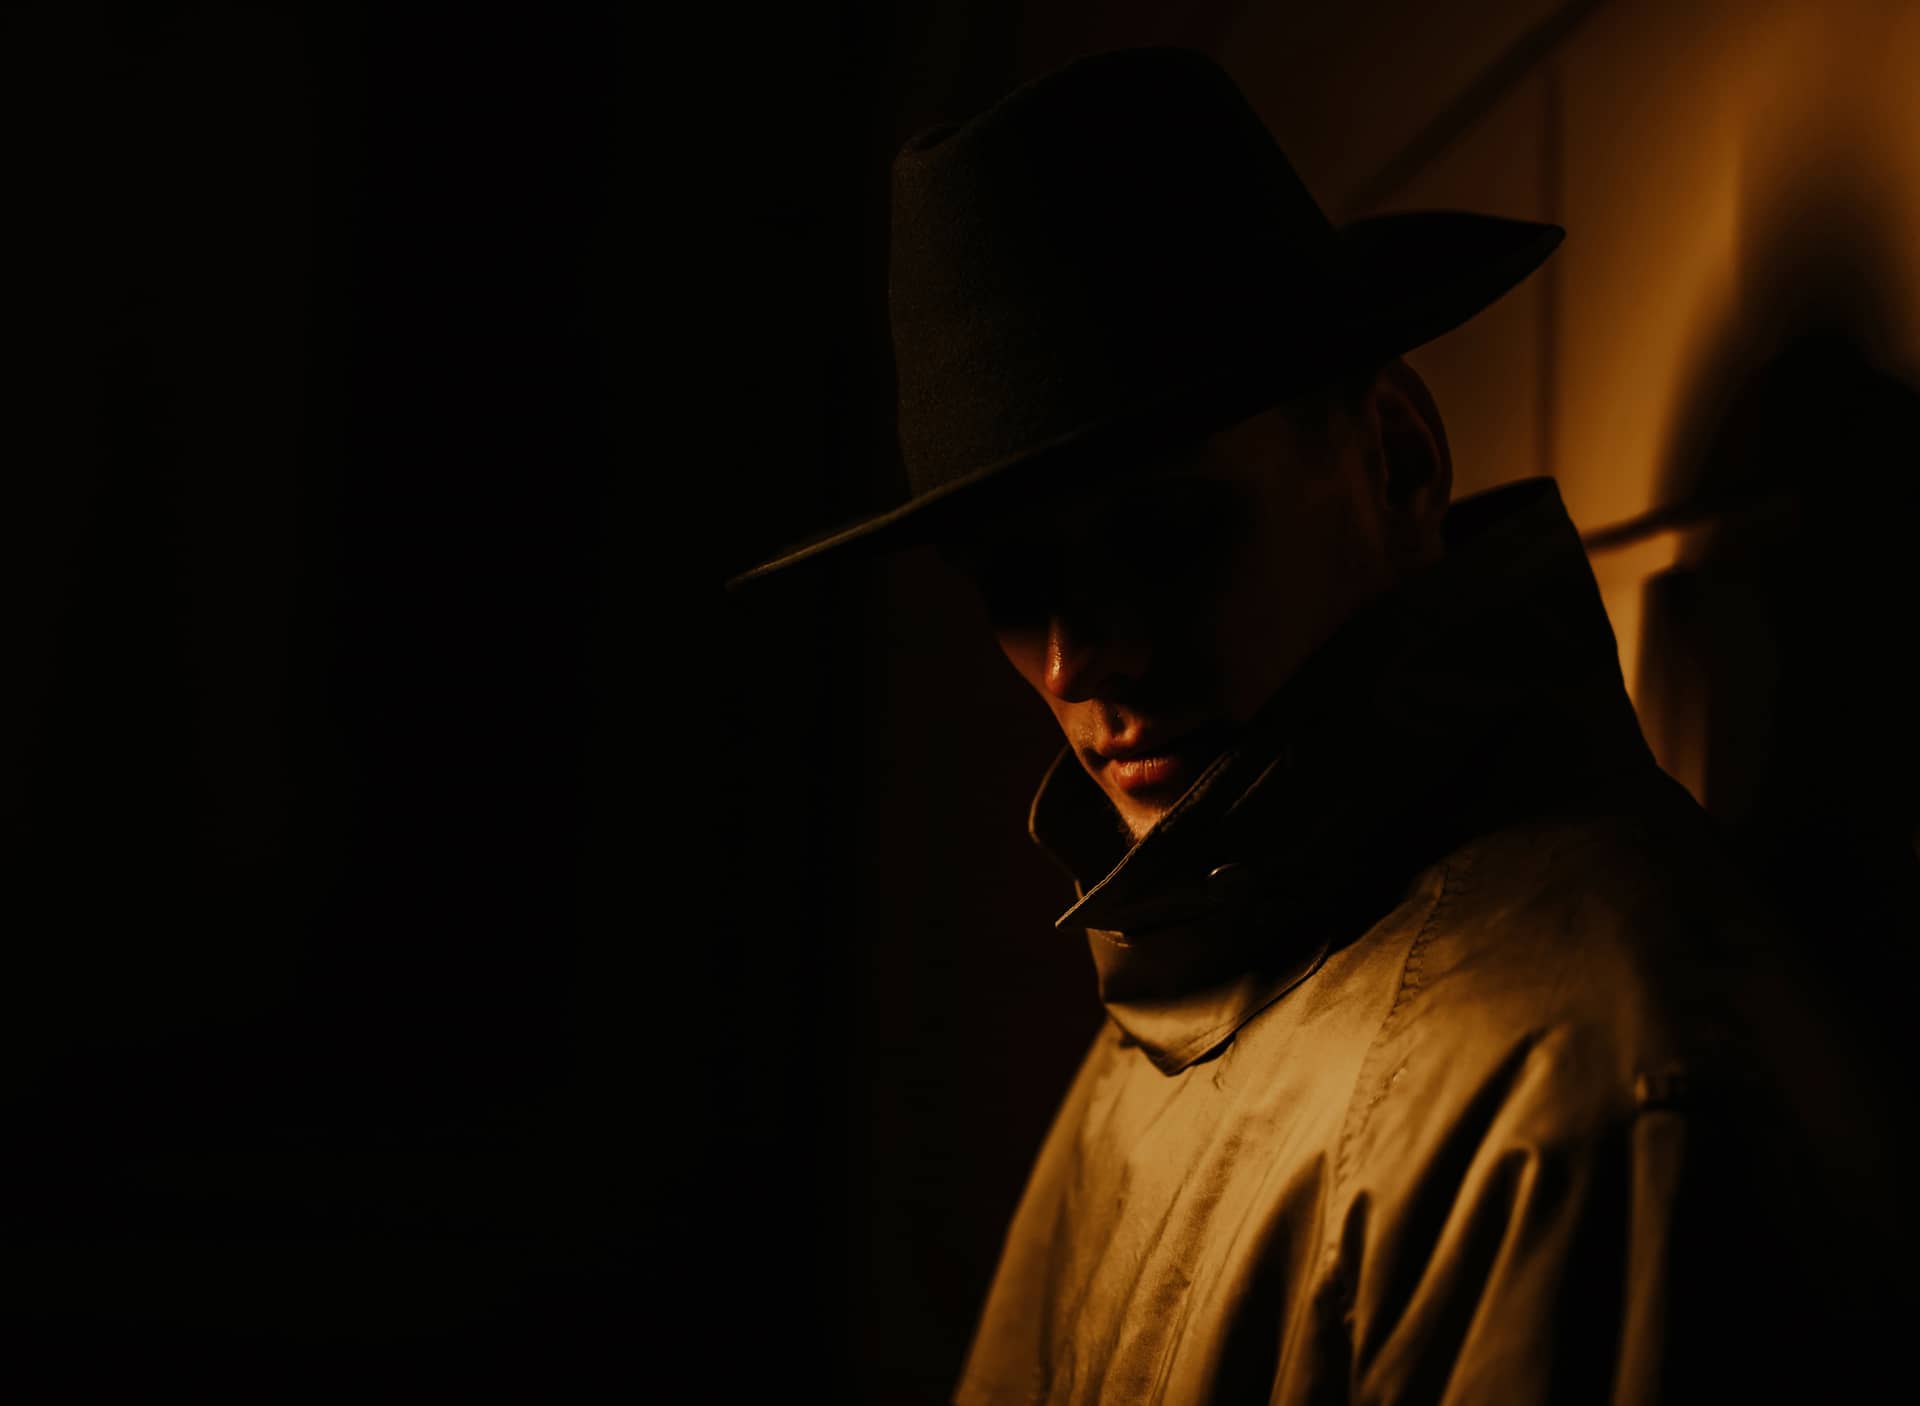 Male pictures for fake profile mysterious portrait noir style male detective